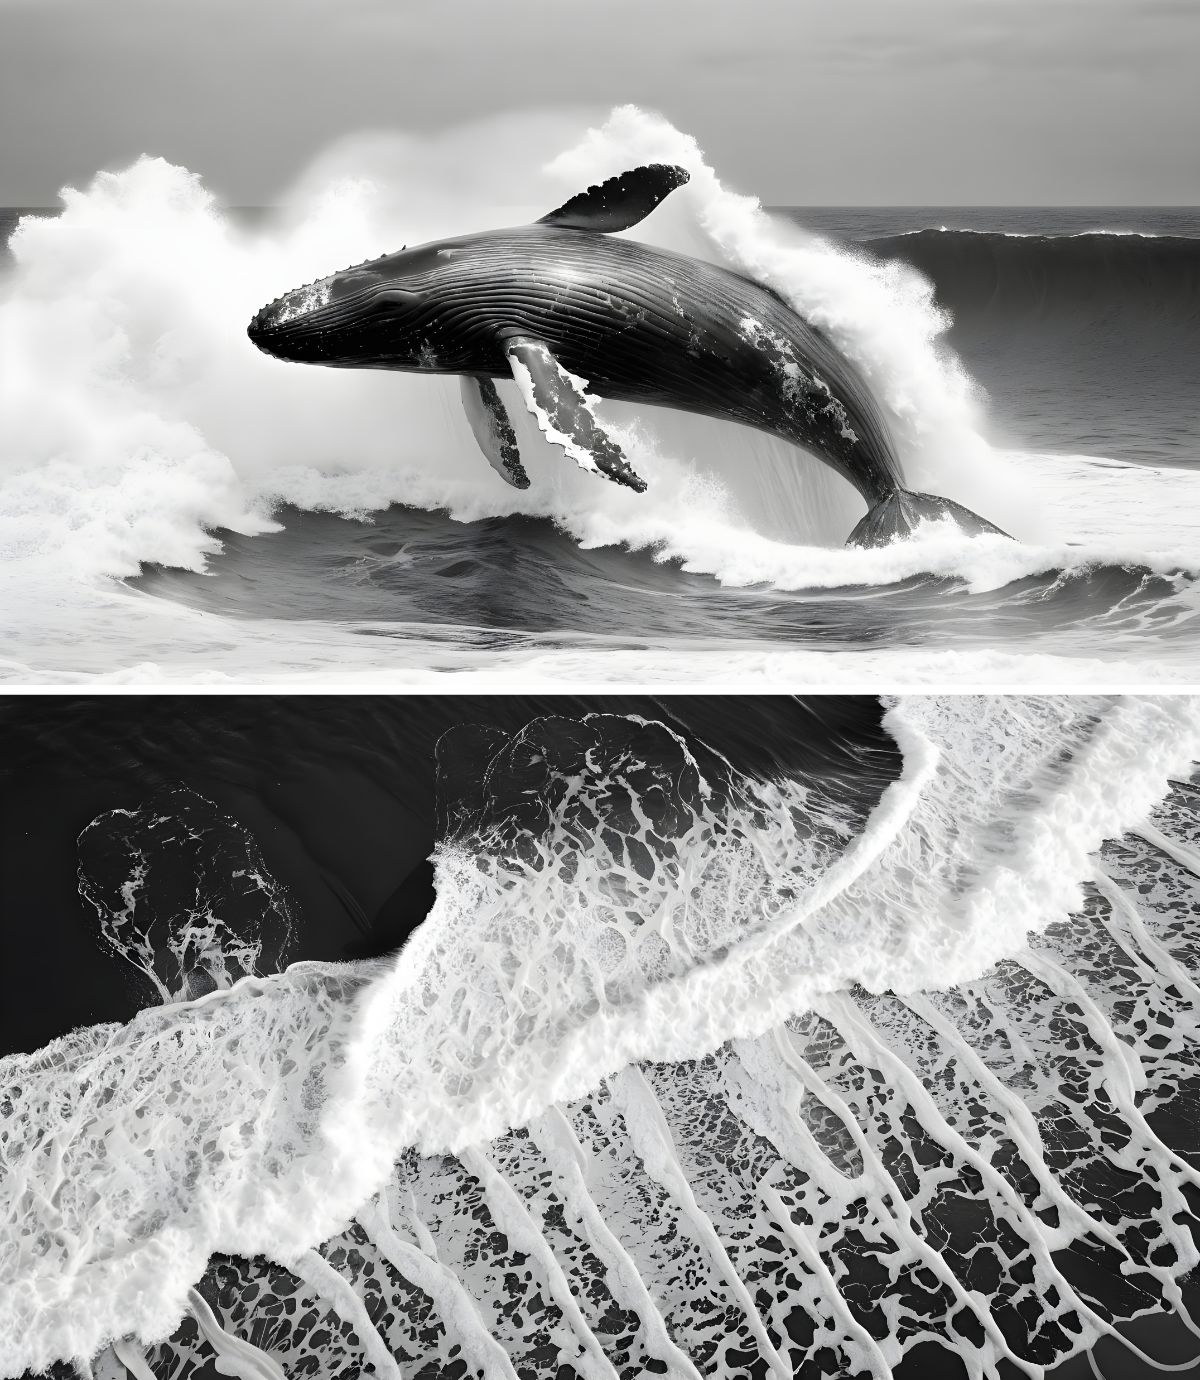 Black and White Whale - img2go